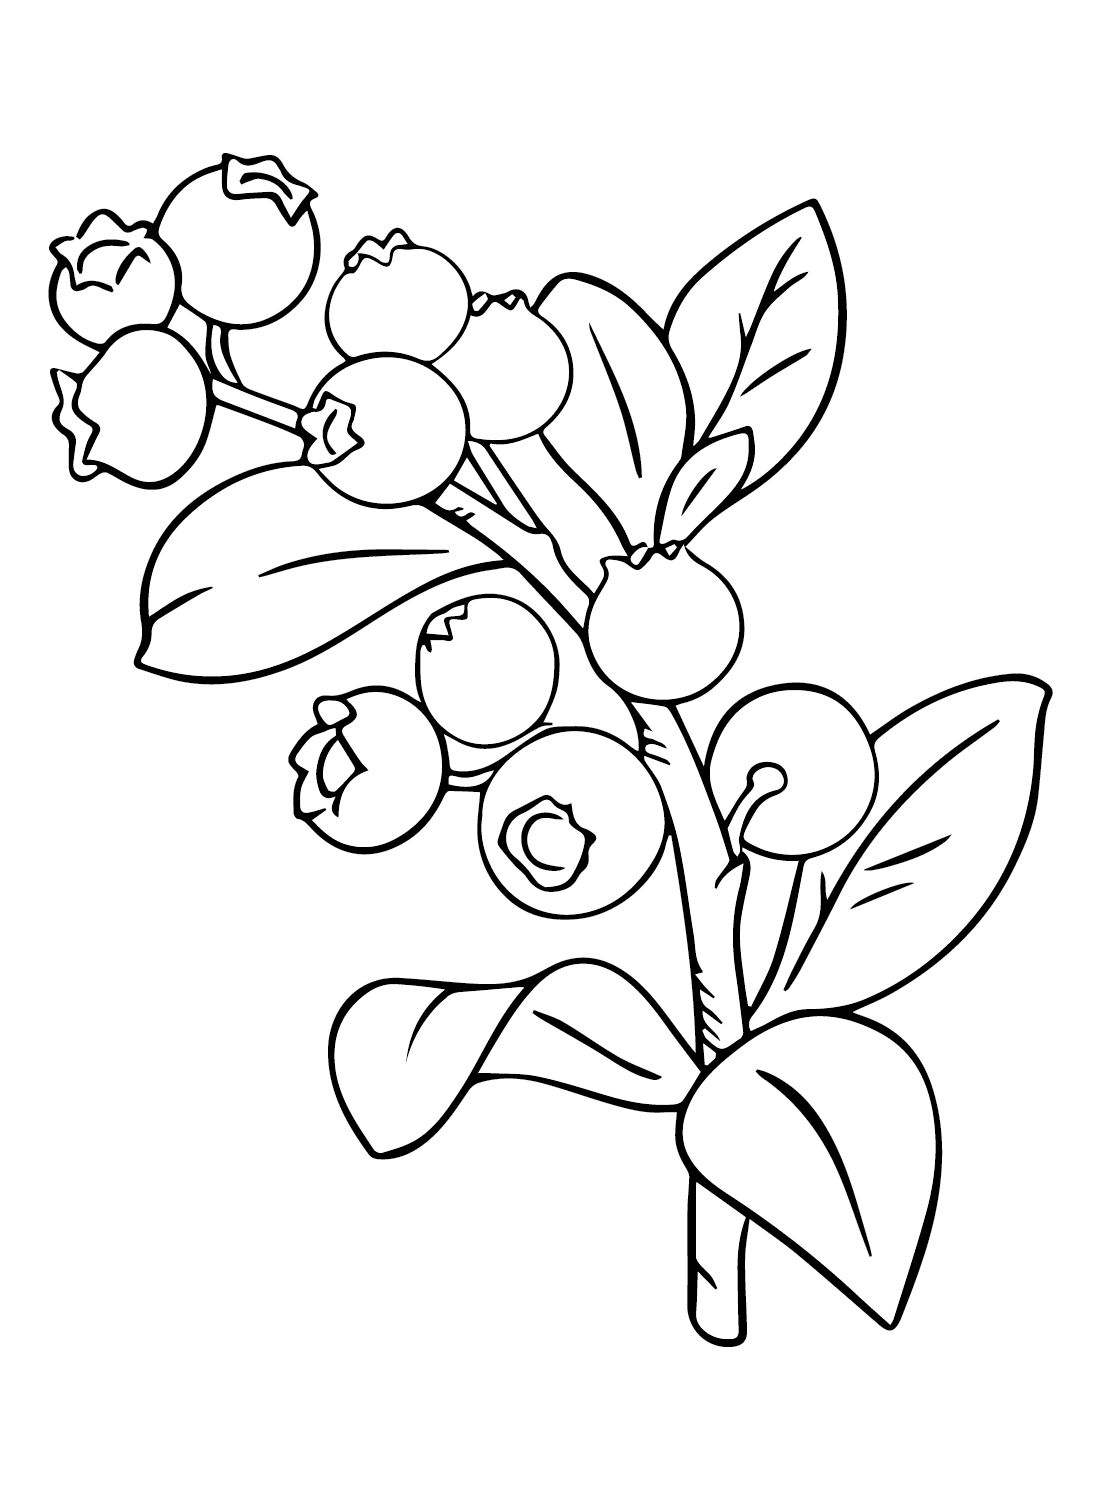 Huckleberry Images Coloring Page